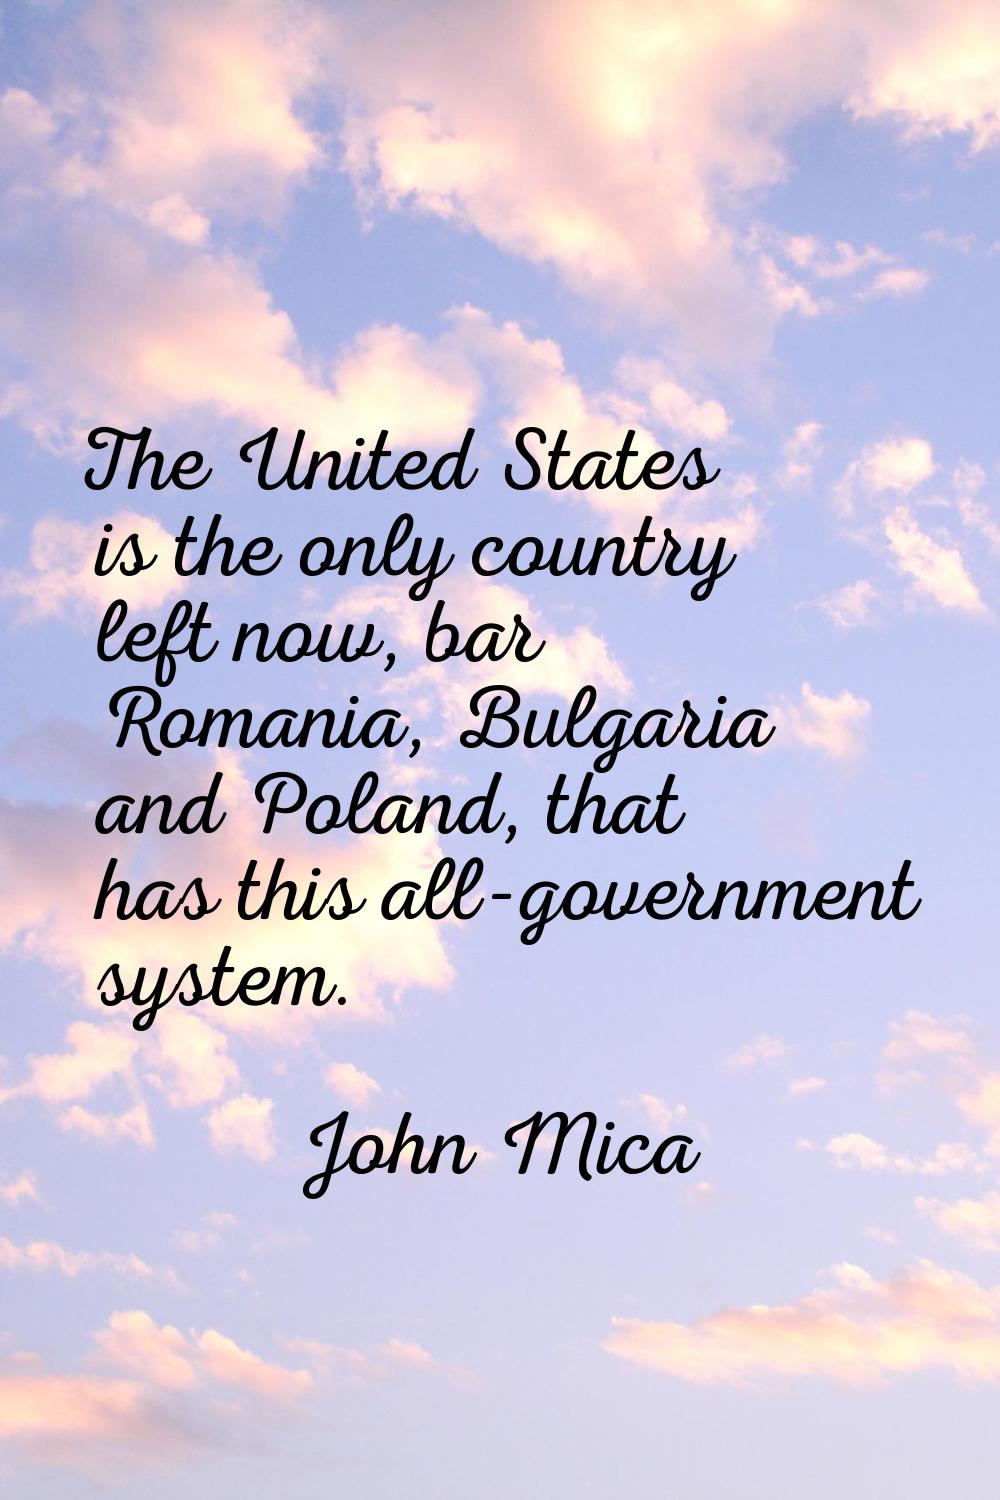 The United States is the only country left now, bar Romania, Bulgaria and Poland, that has this all